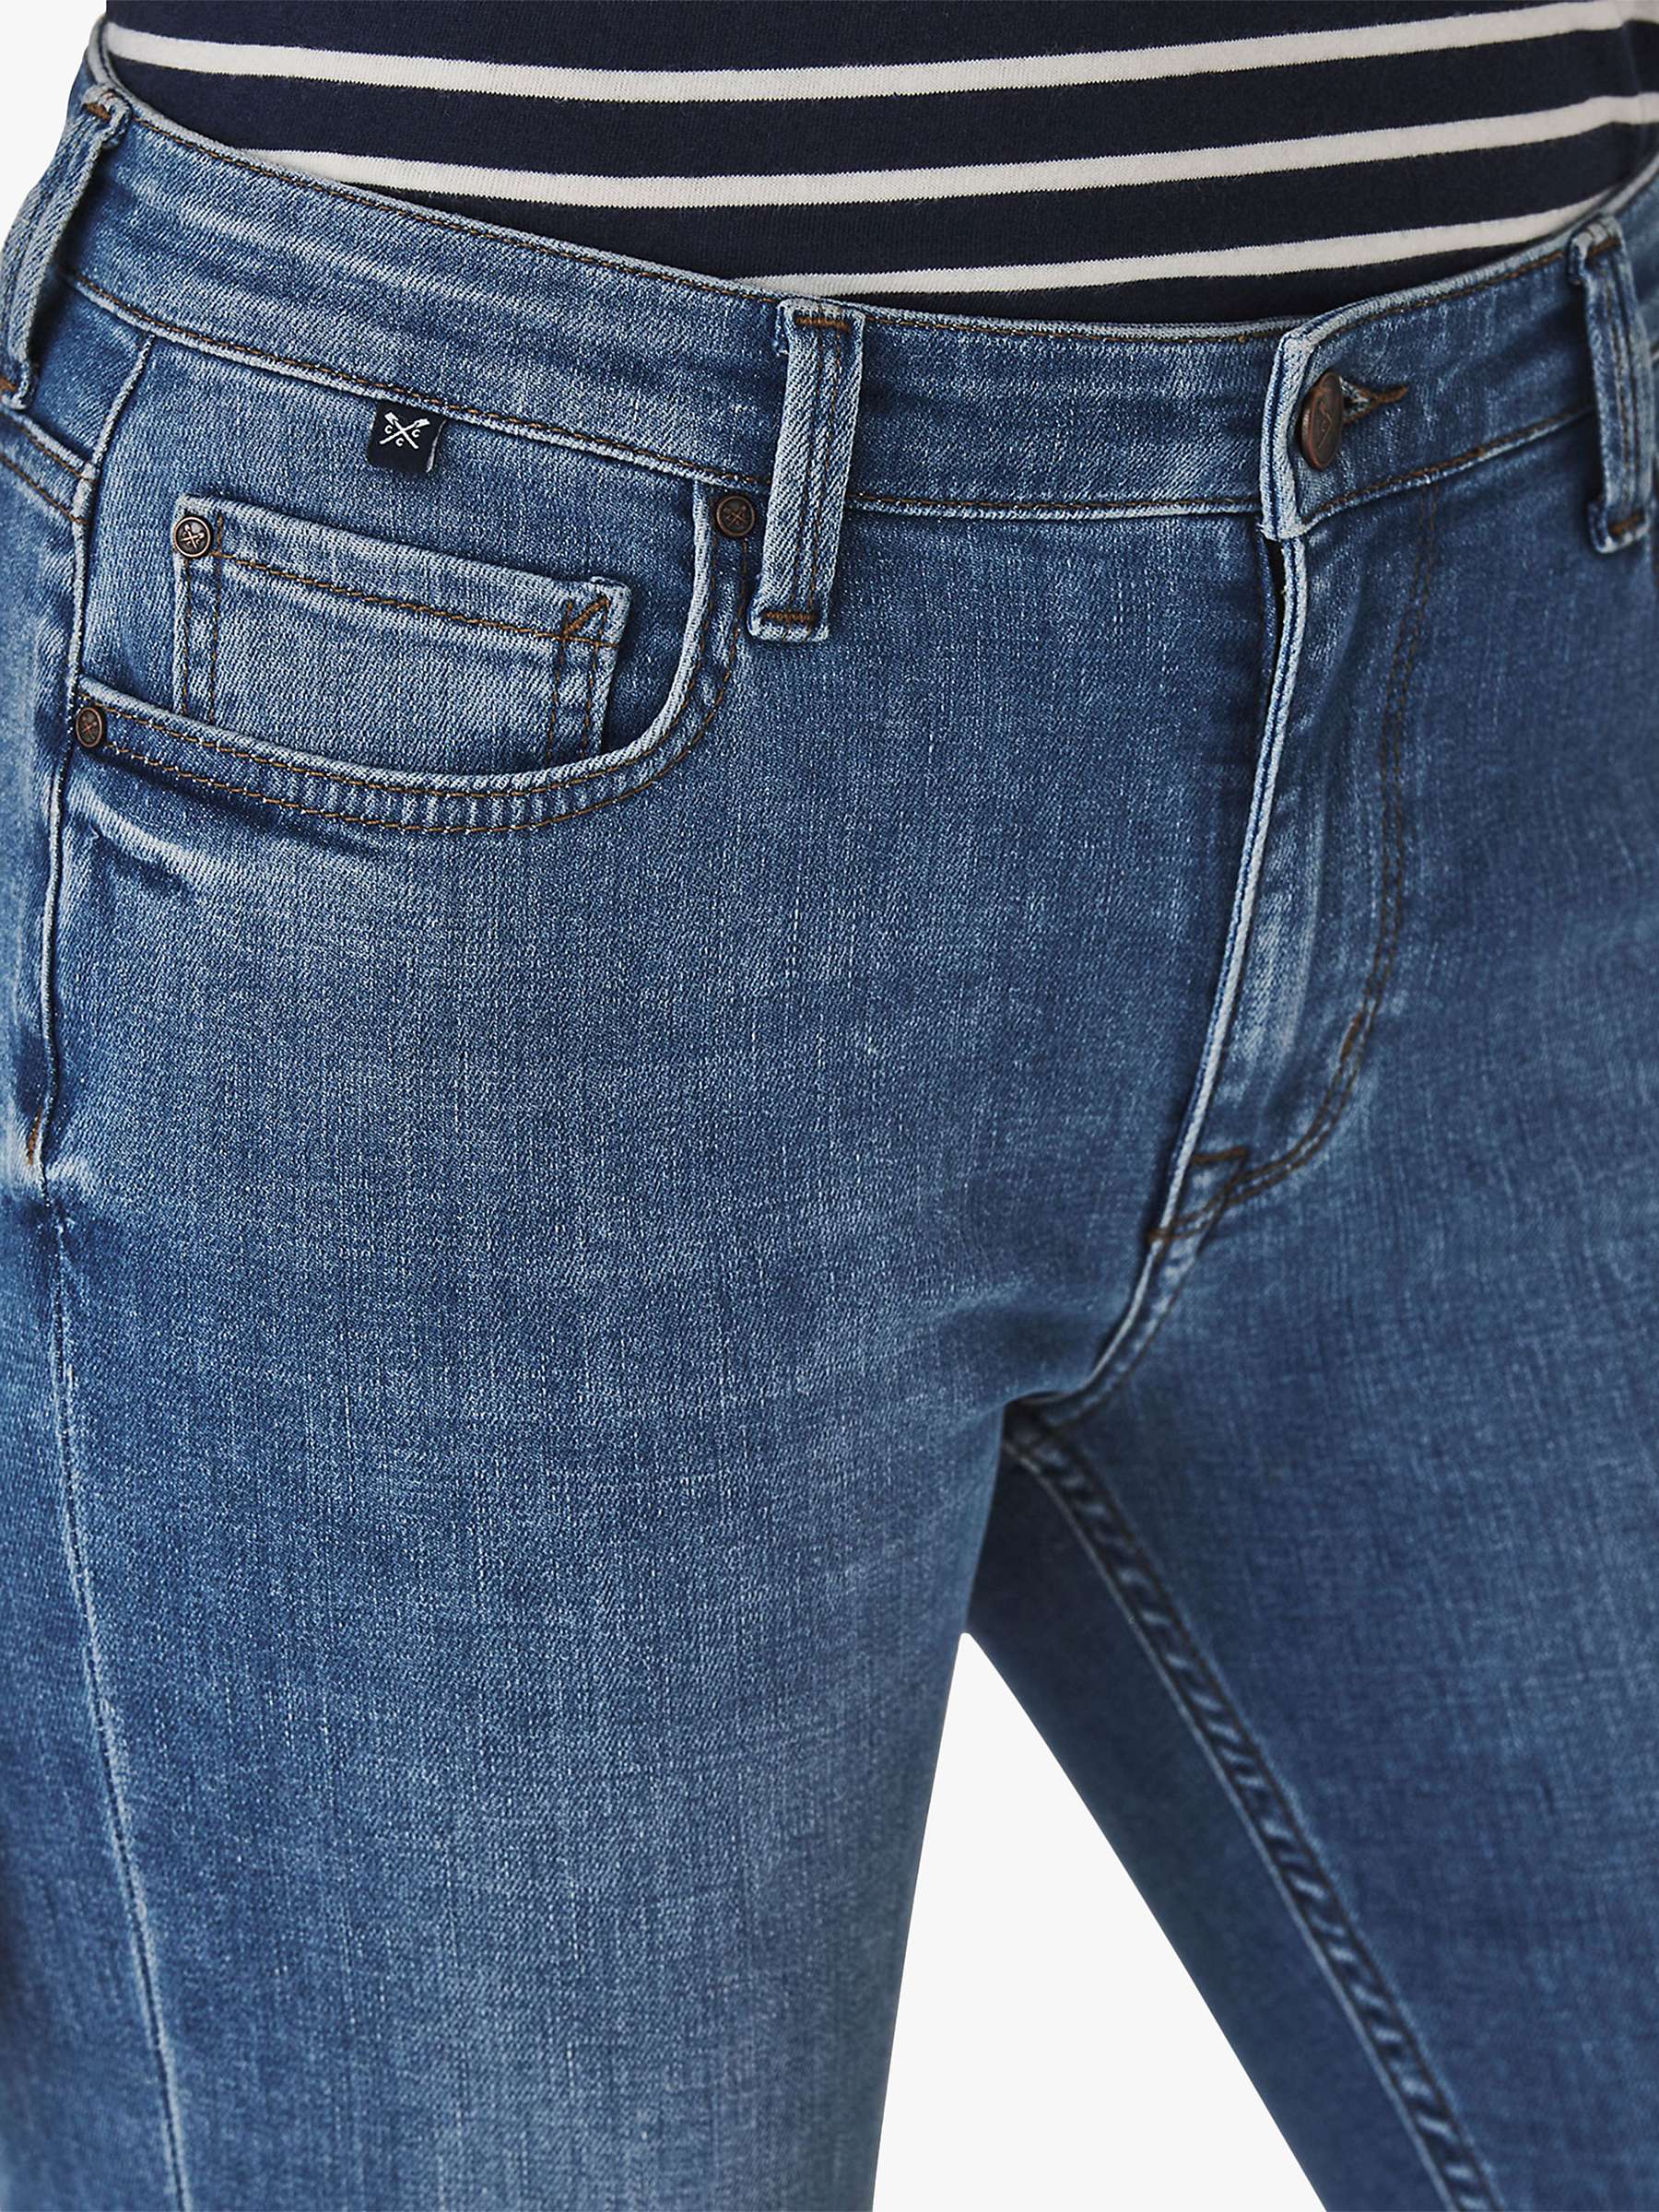 Buy Crew Clothing Mid Rise Straight Cut Jeans, Light Blue Online at johnlewis.com